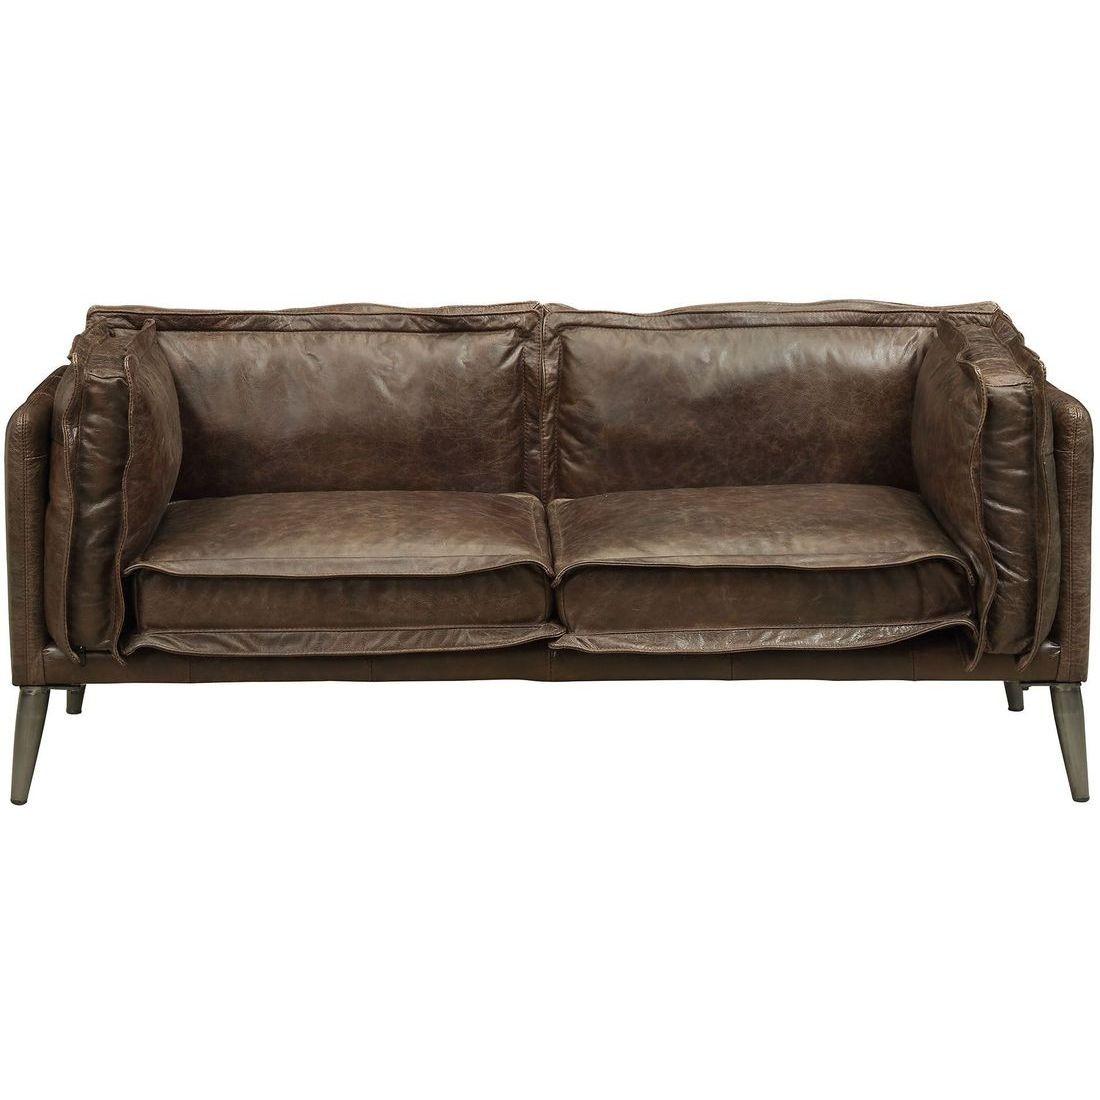 Contemporary,  Vintage Loveseat Porchester-52481 Porchester-52481 in Chocolate Top grain leather